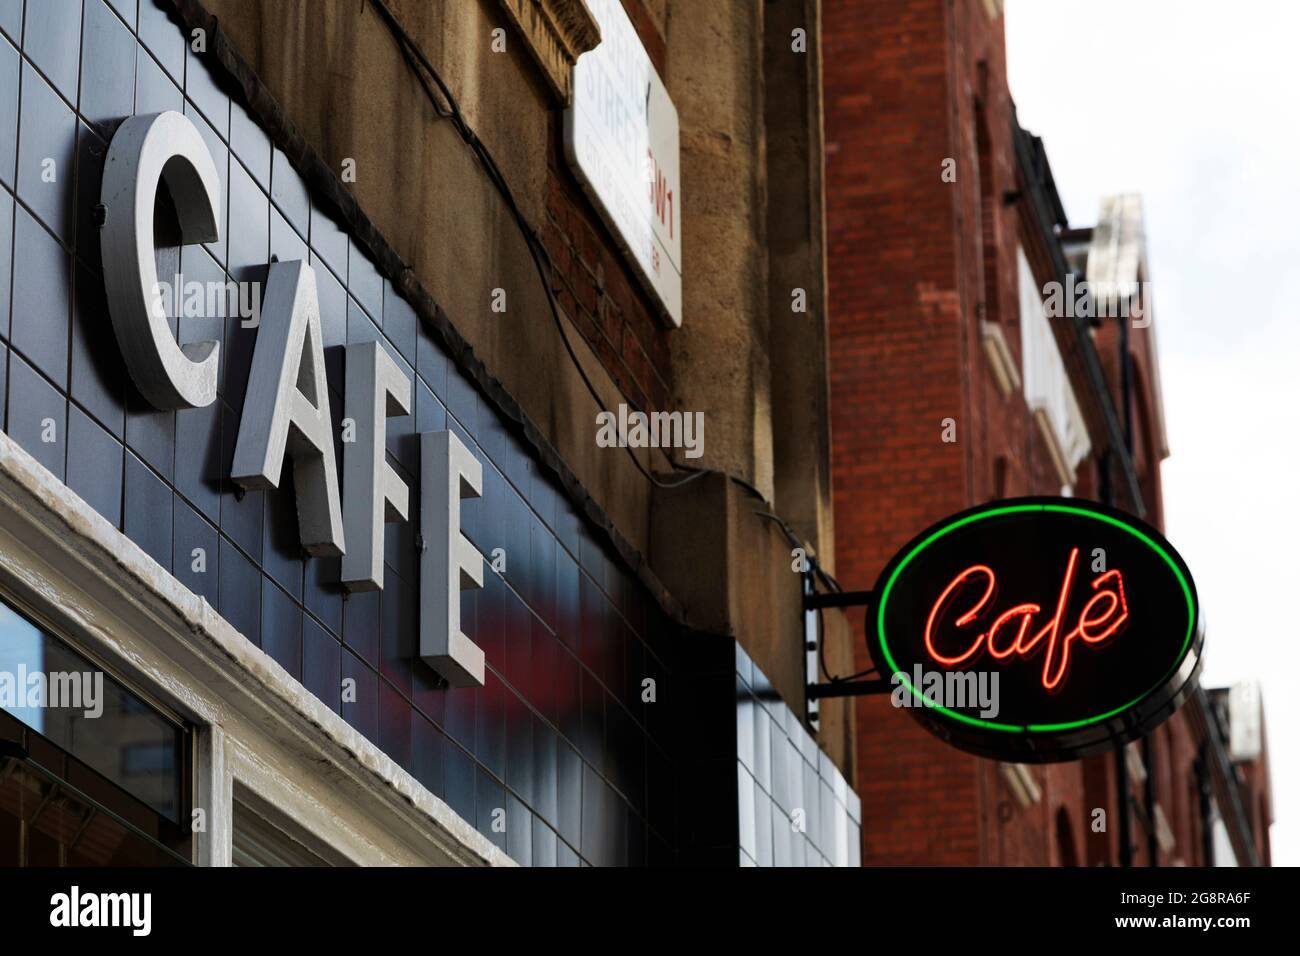 Sign for a cafe in London, England. A neon light advertises the cafe. Stock Photo